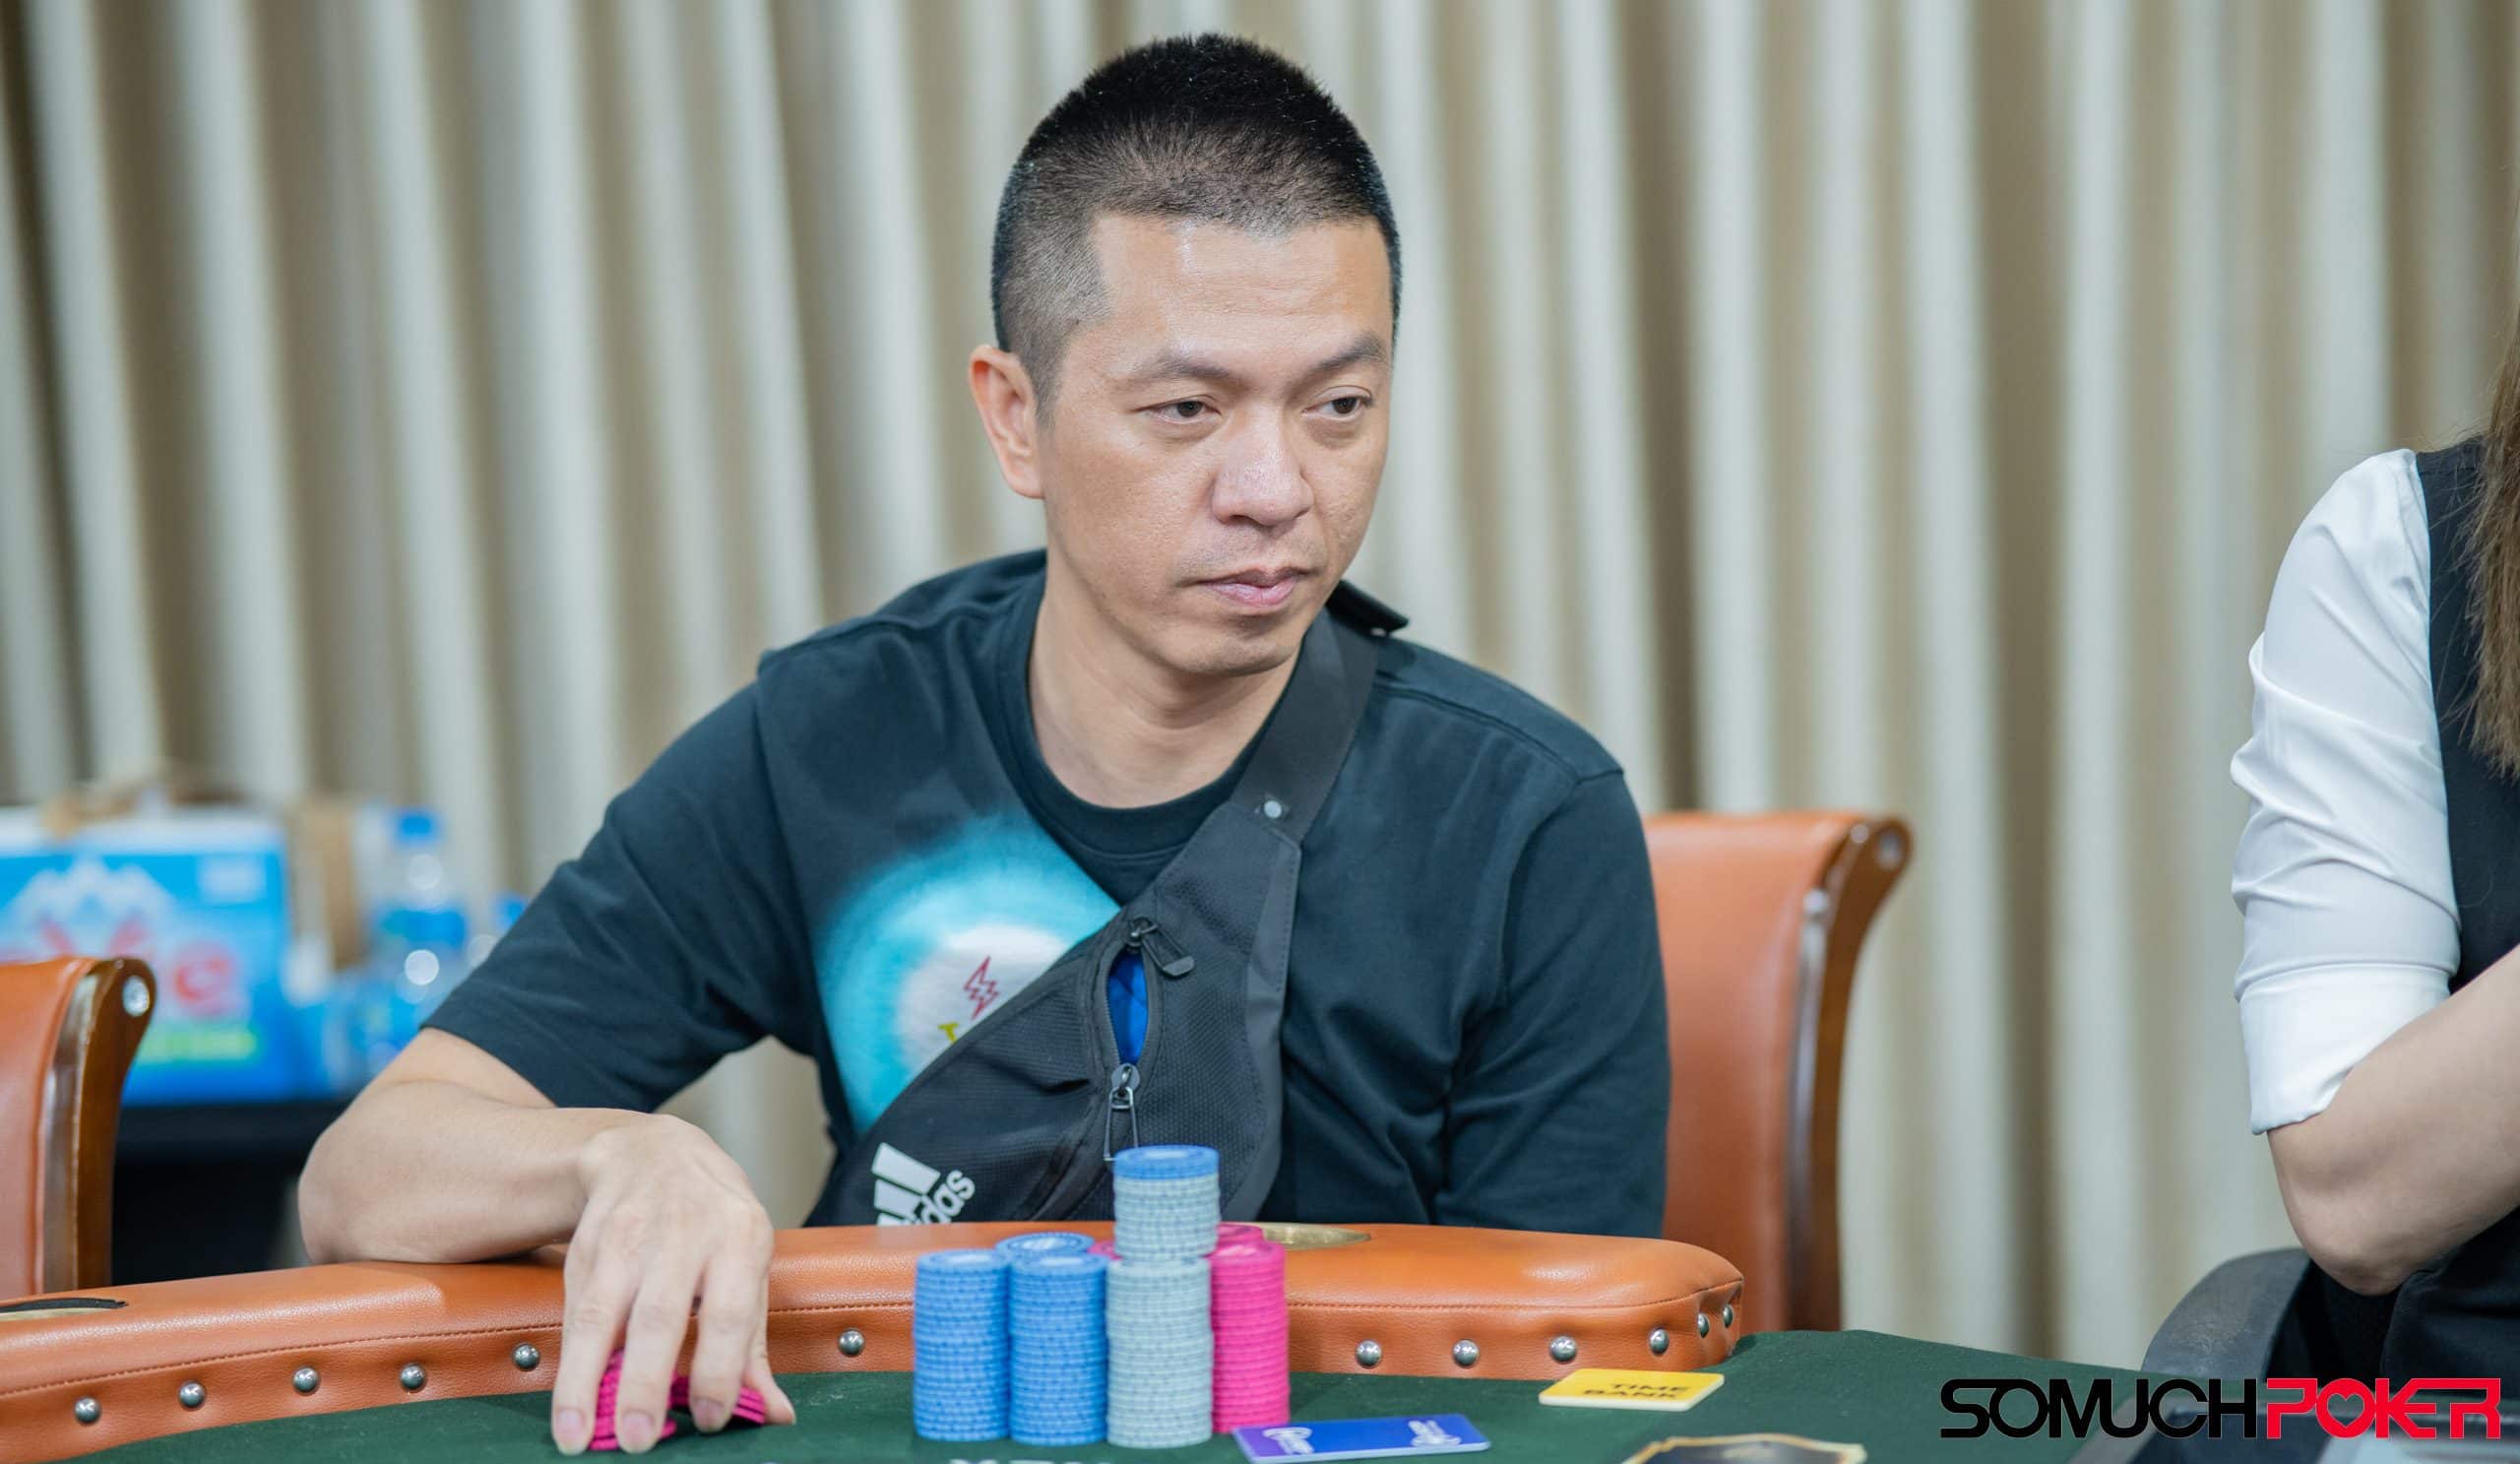 USOP Hanoi: Nguyen Quang Huy leads High Roller Megastack final 16 players - Seat Draw